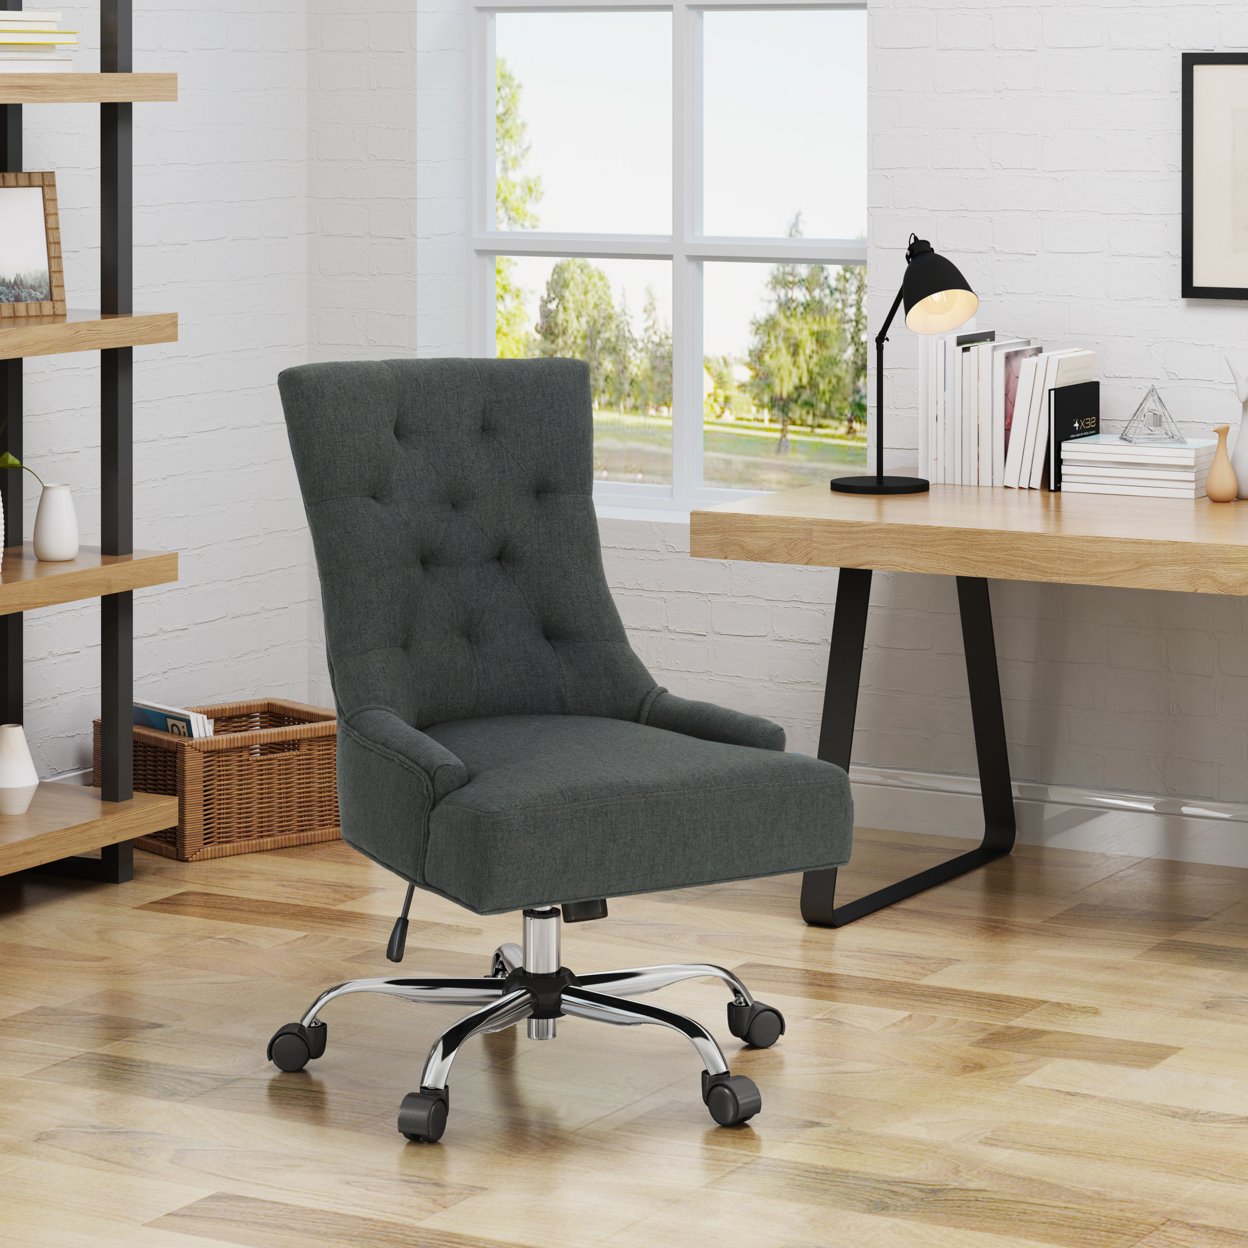 Bagnold Home Office Fabric Desk Chair - Dark Gray